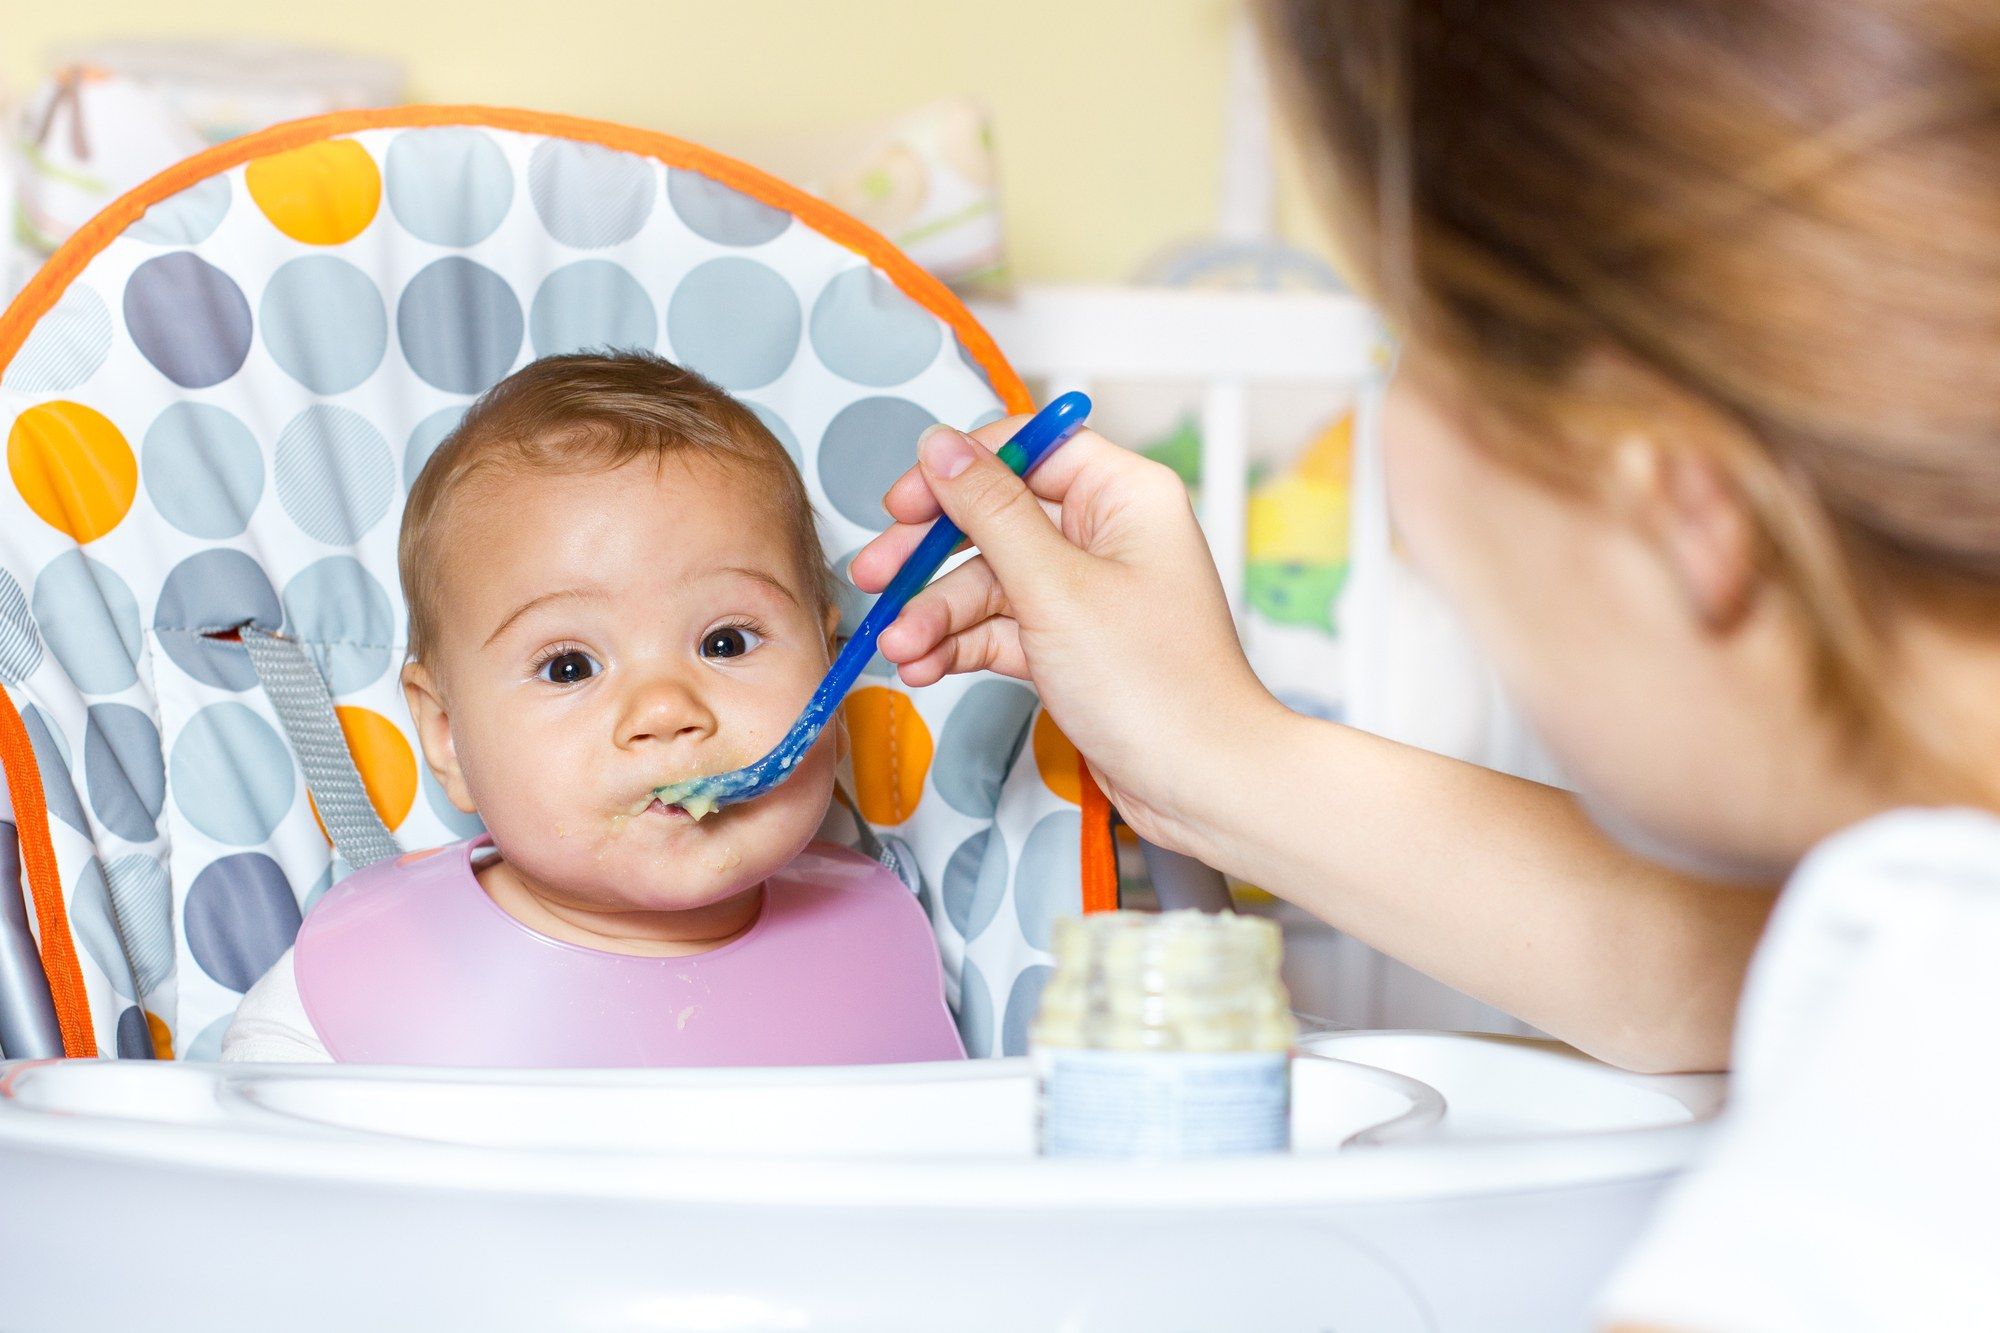 The NY attorney general is demanding stricter baby food safety regulations from the FDA.